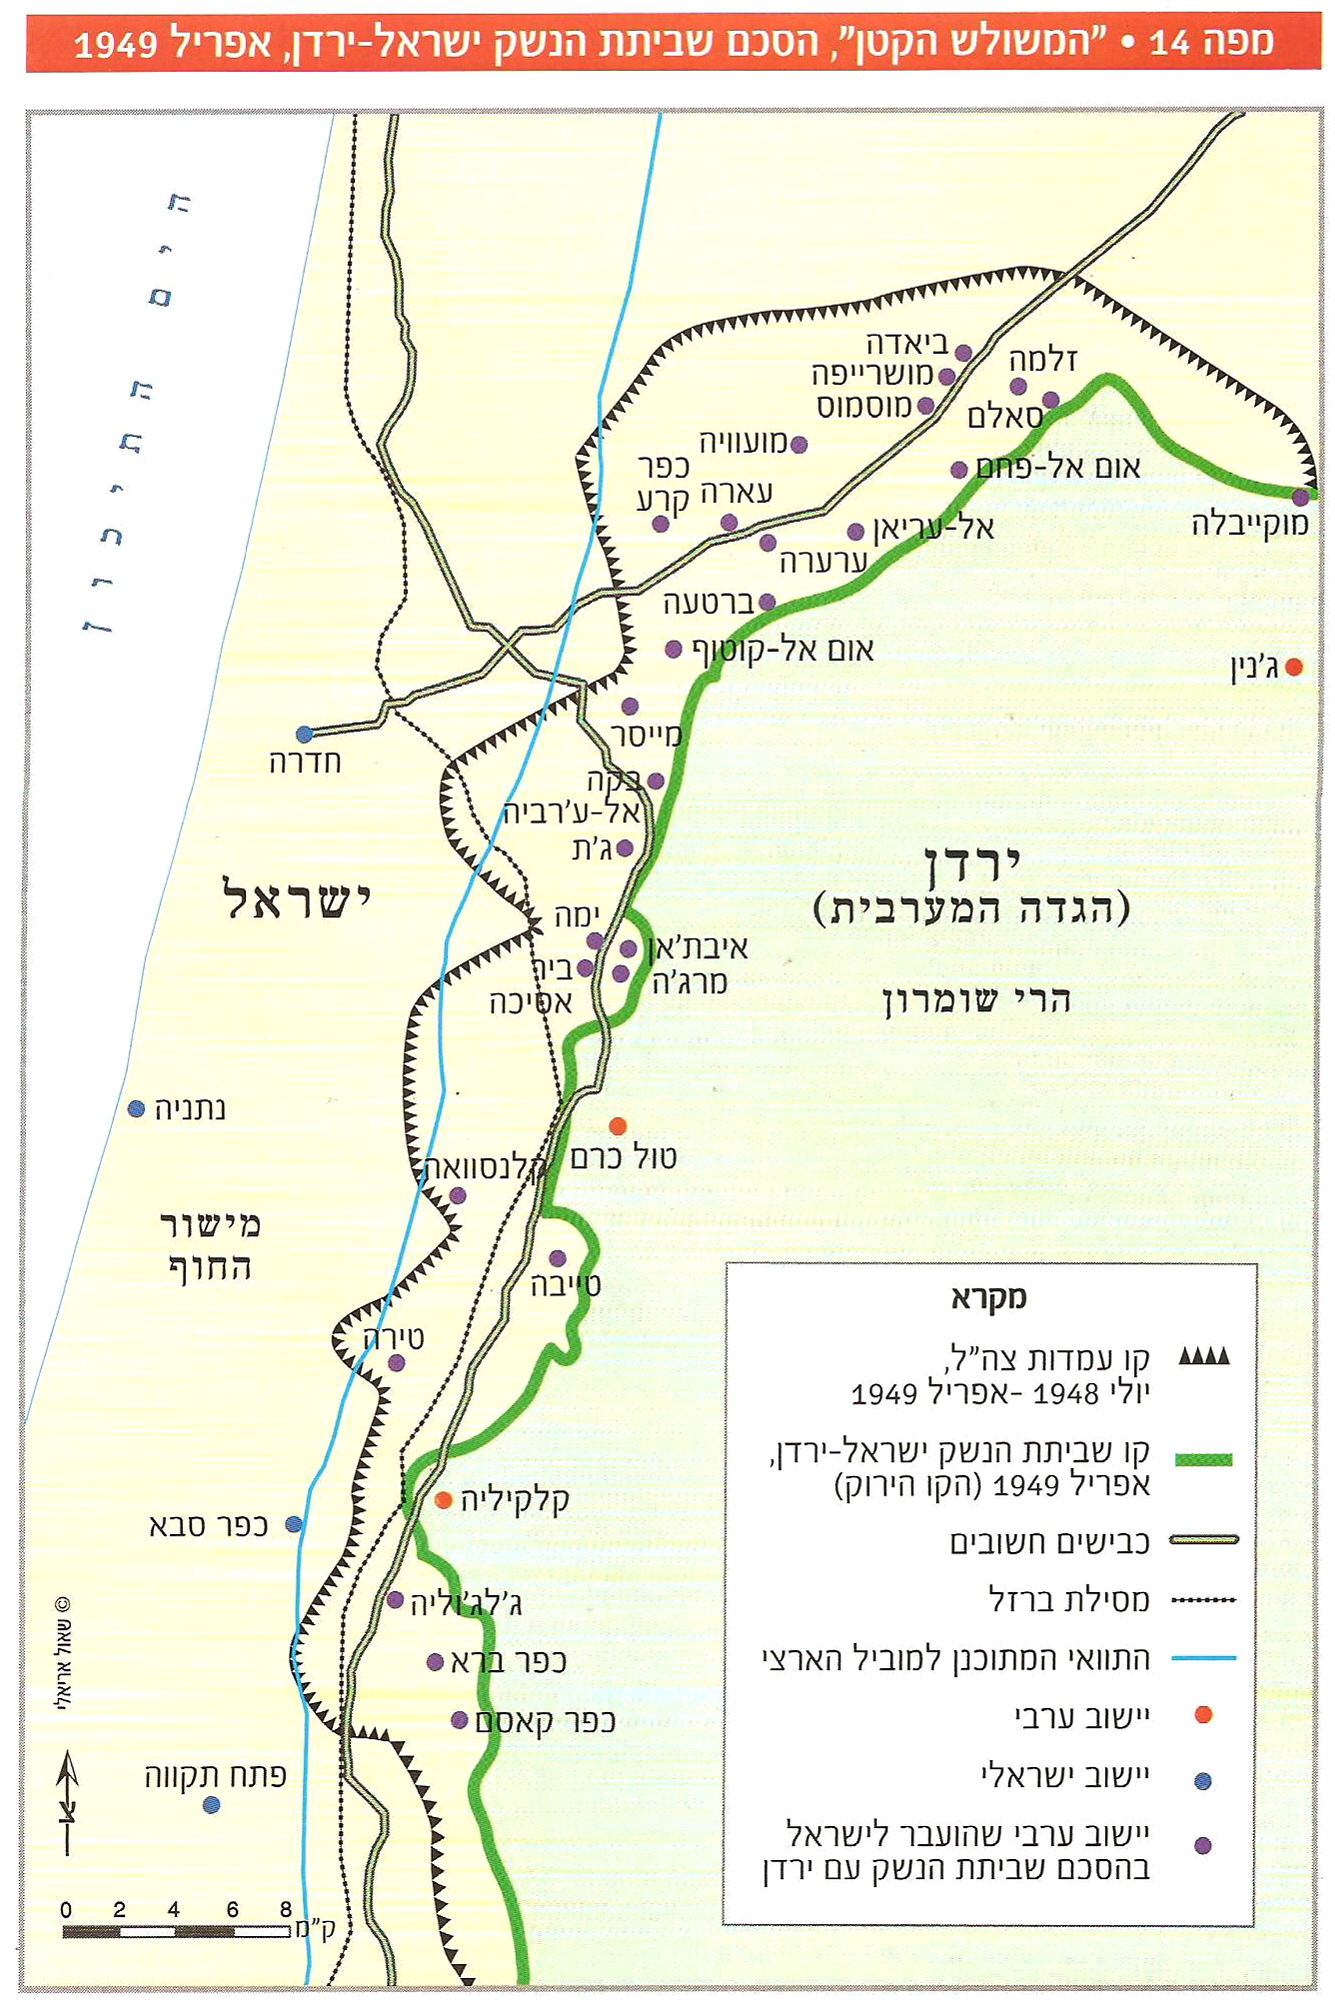 The Armistice Agreement between Jordan and Israel - Little Triangle - Map - Hebrew